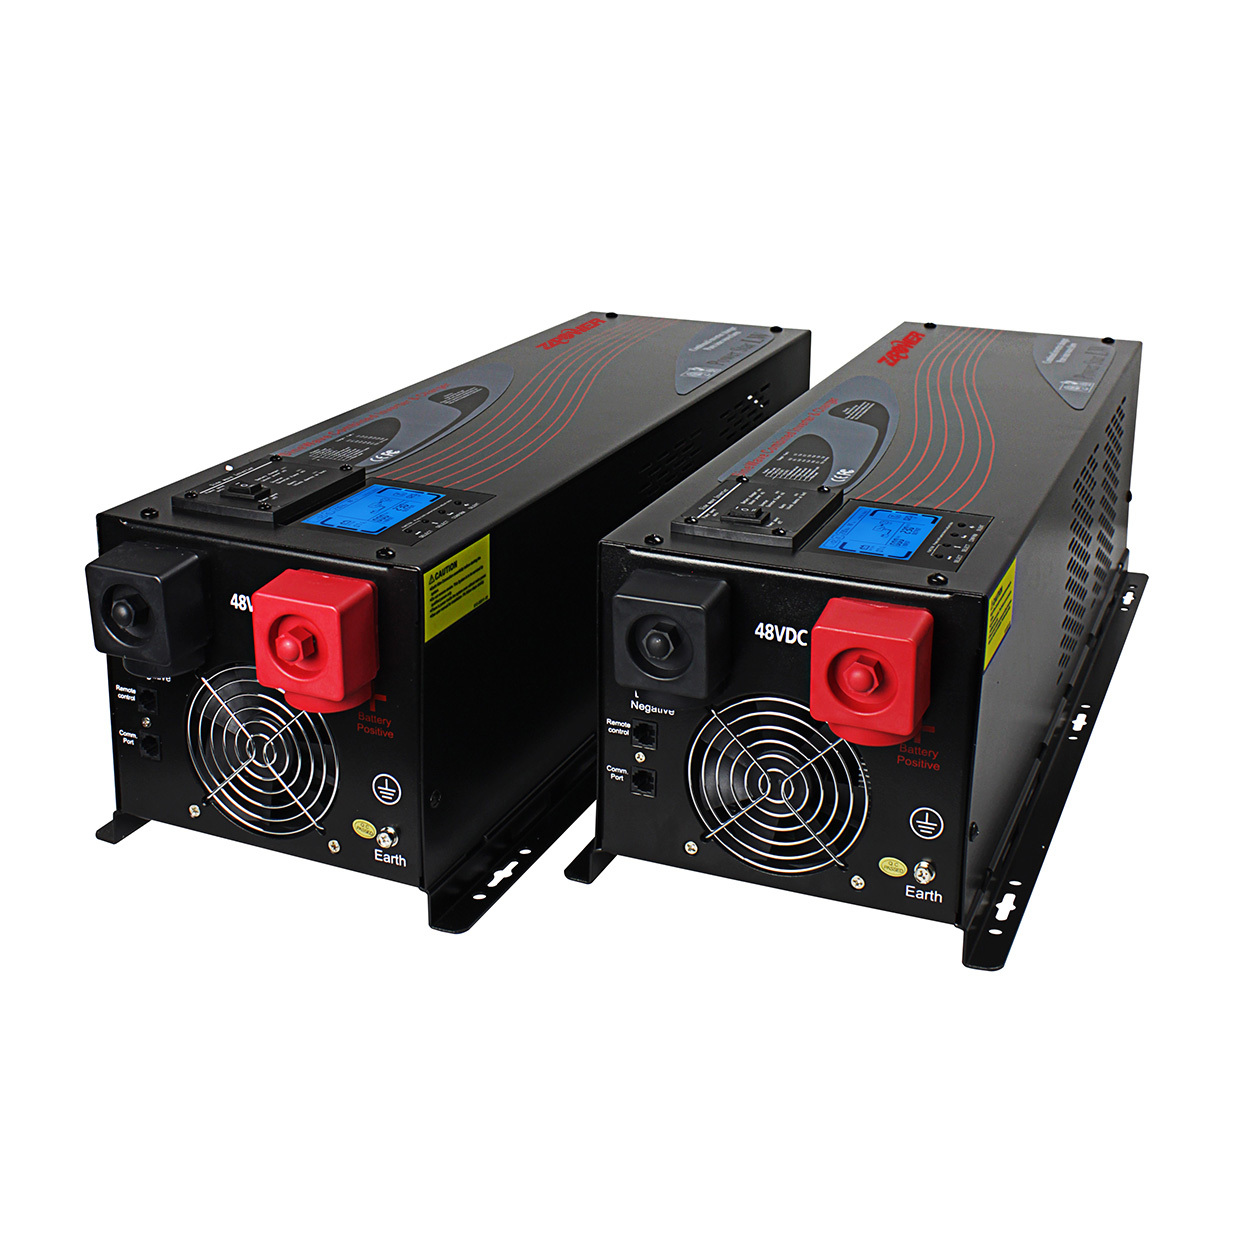 Why choose a quality 48V low frequency inverter from China